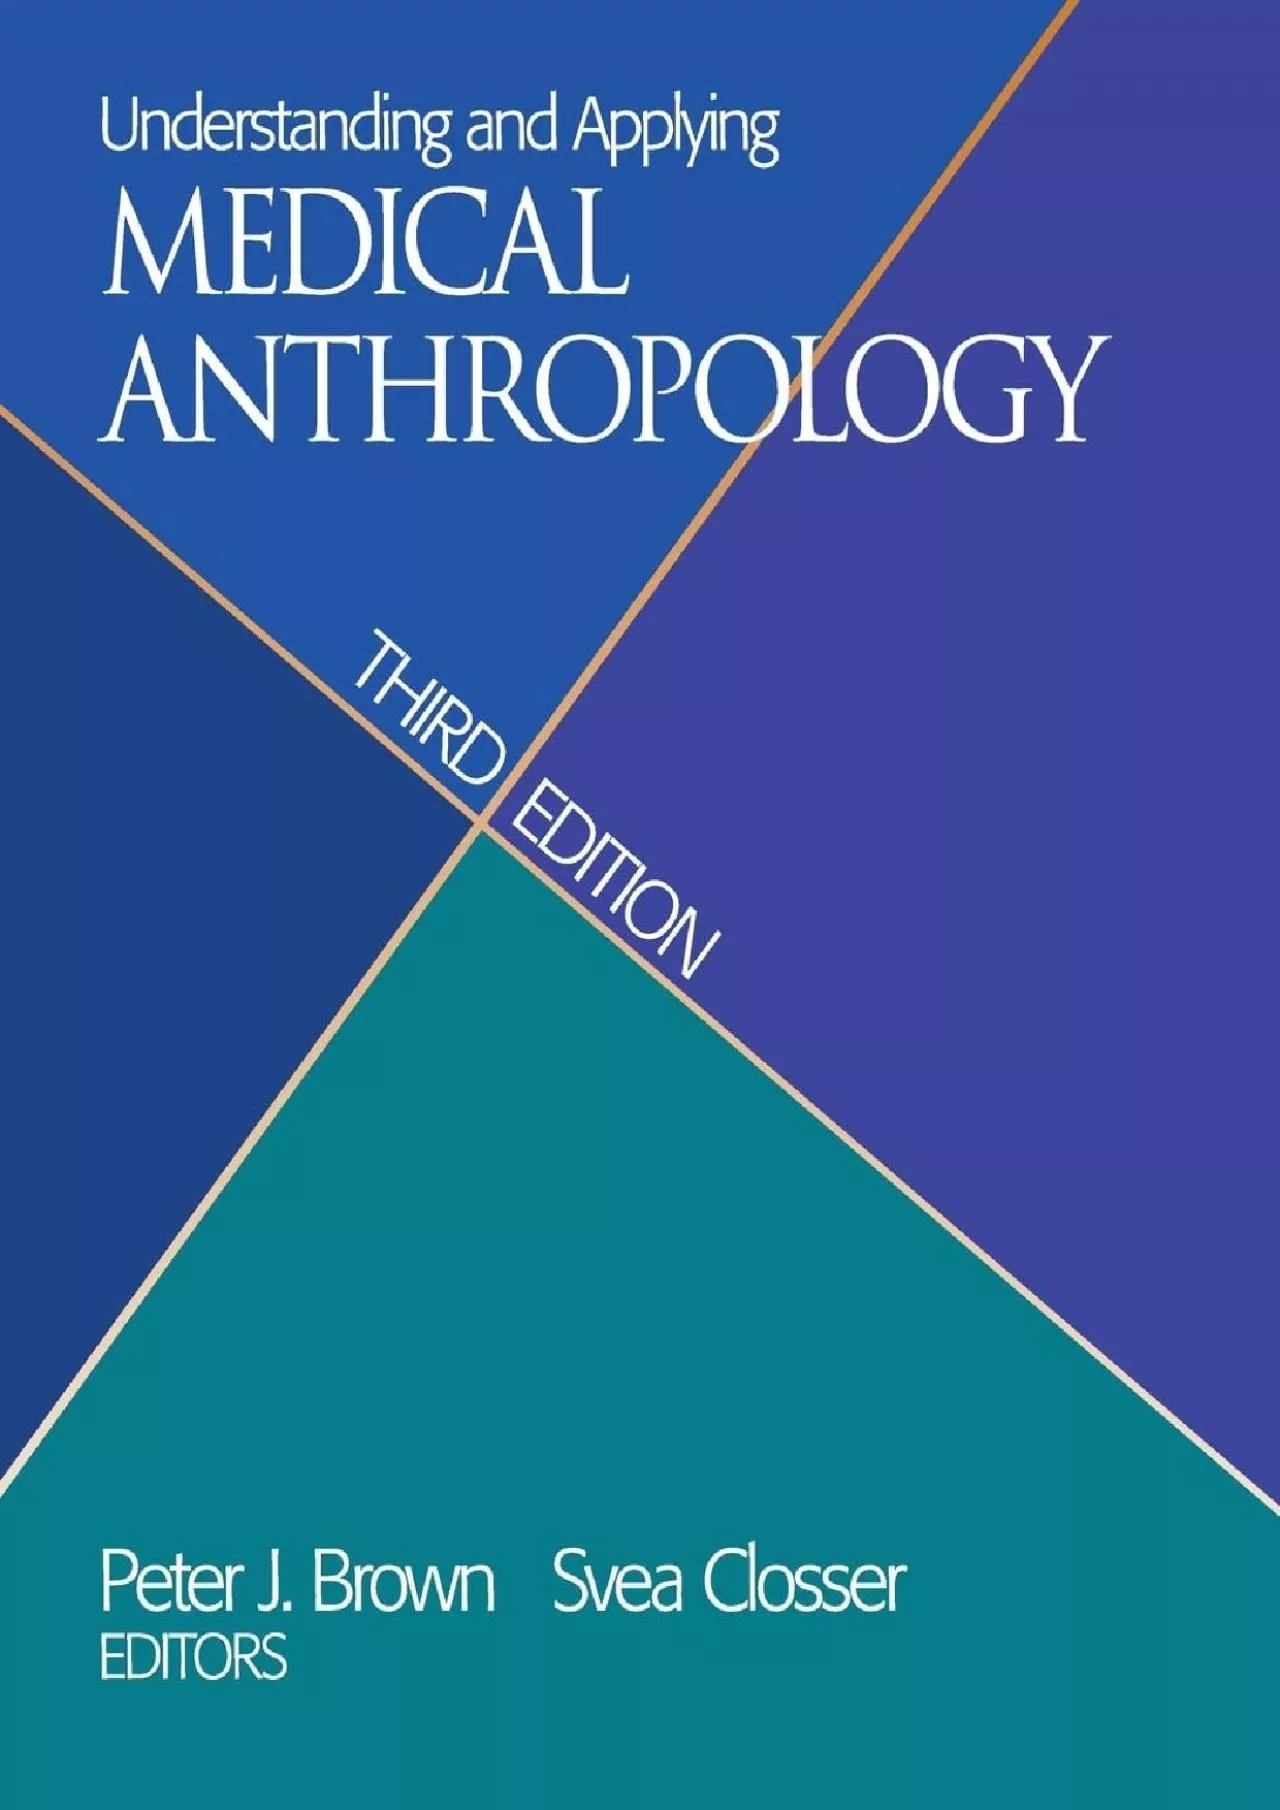 (BOOS)-Understanding and Applying Medical Anthropology